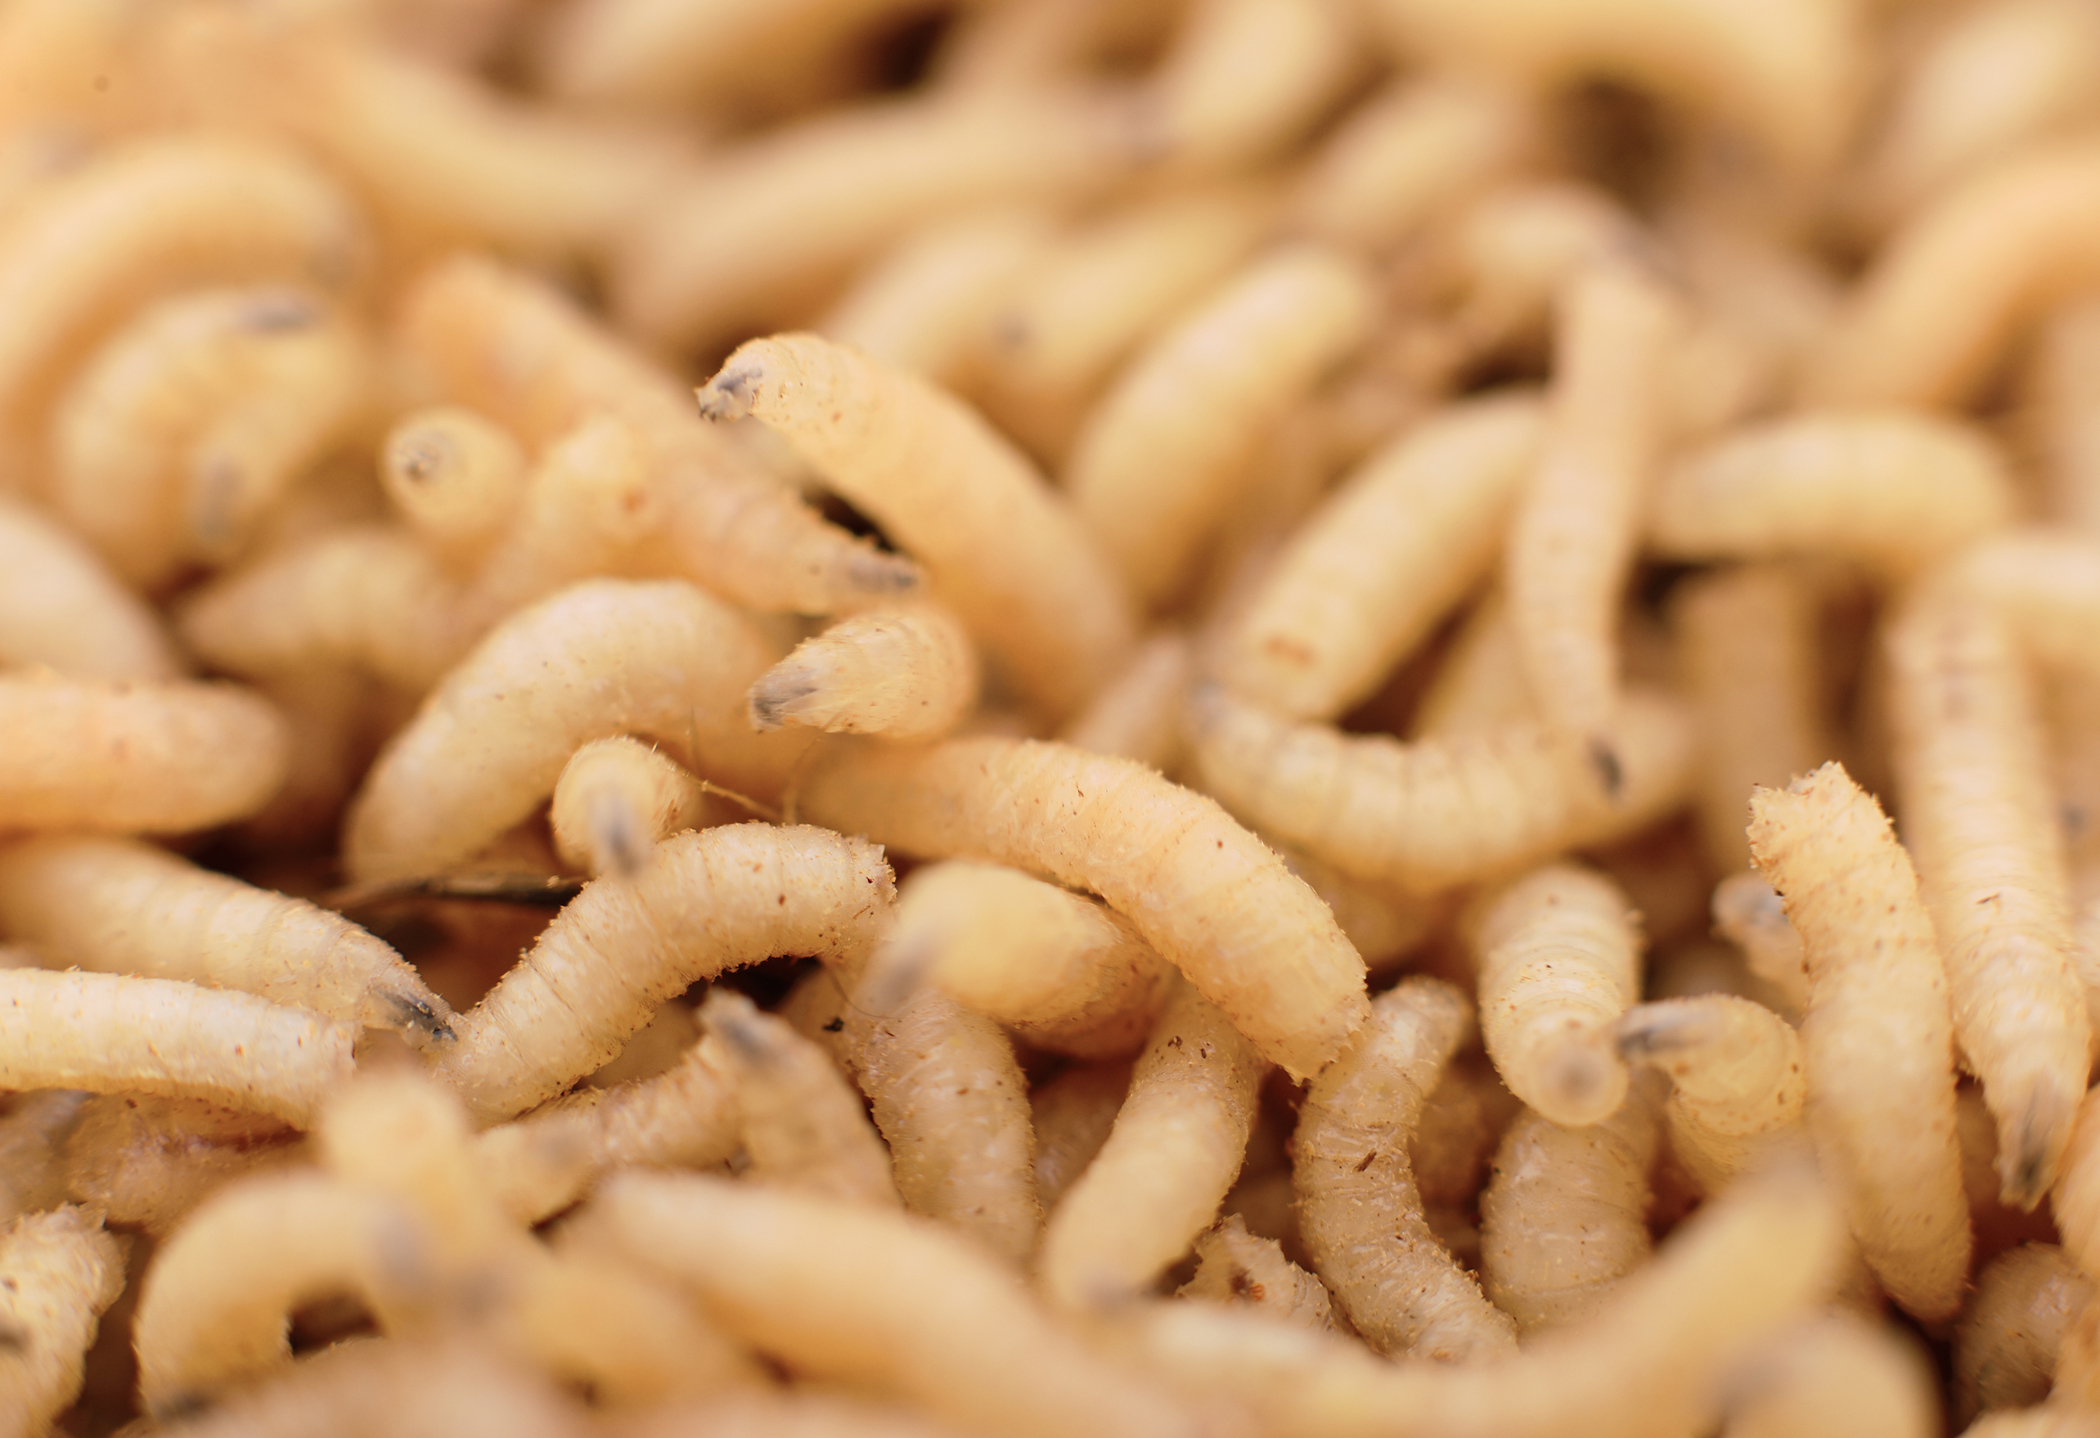 Creepiest Mortician Stories - maggots insects